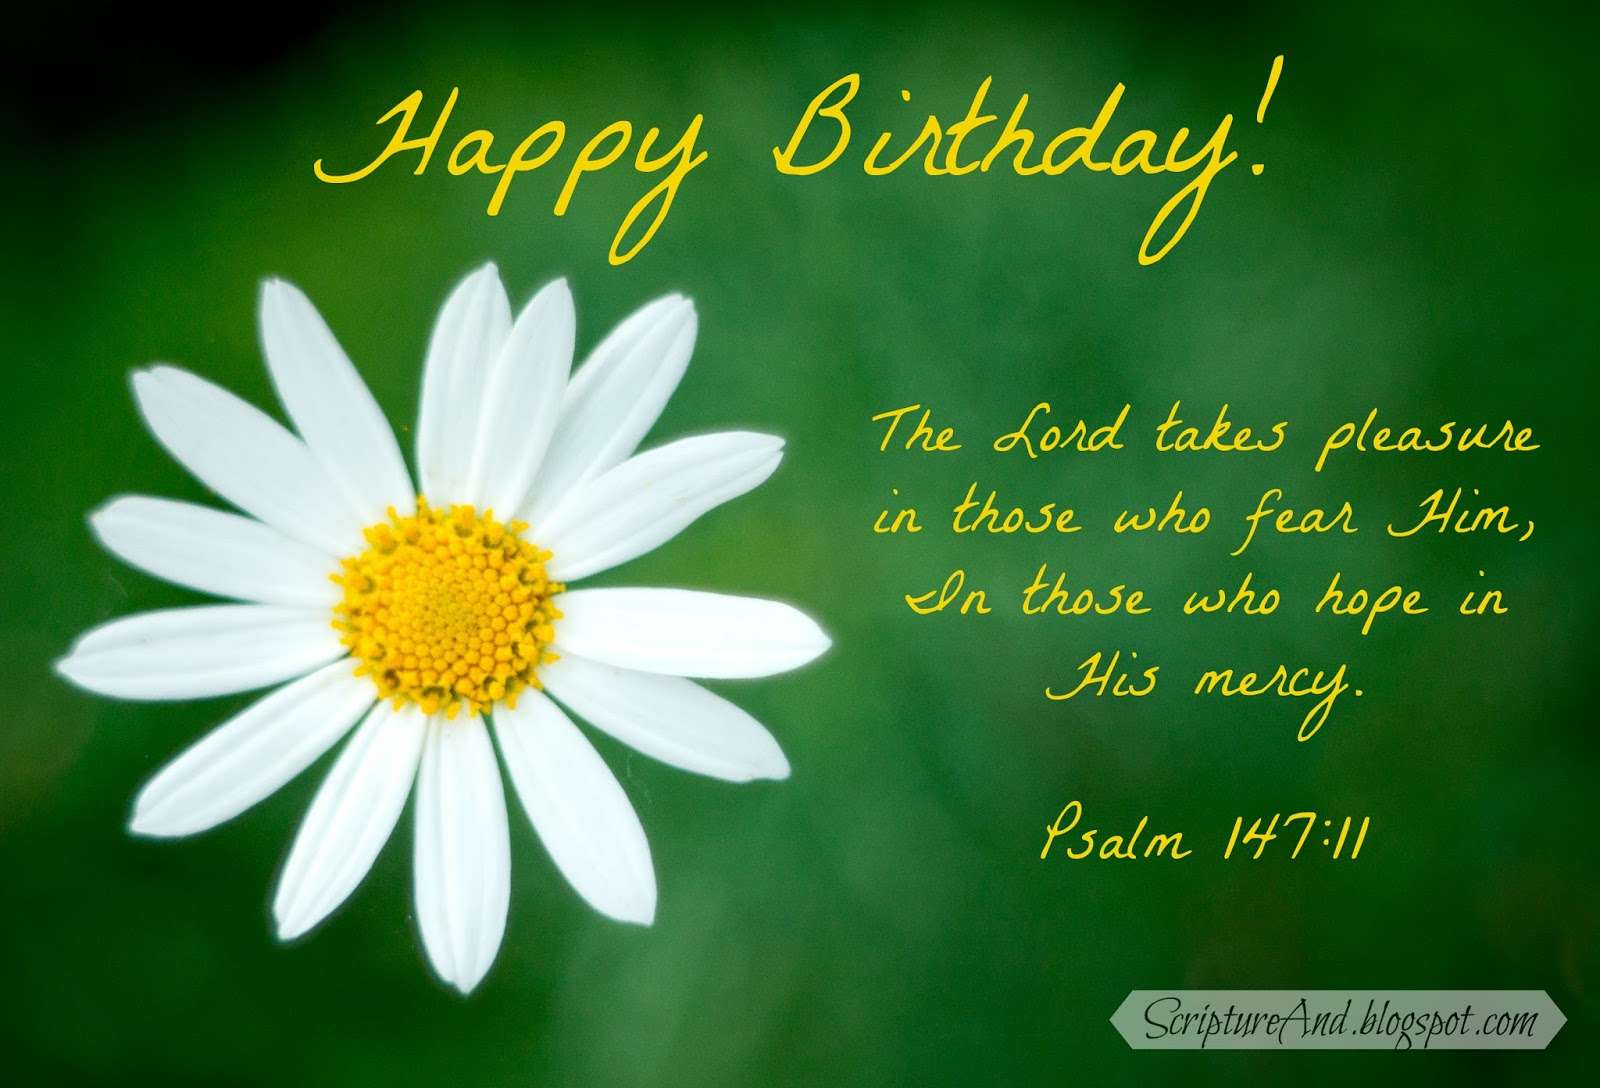 Free Birthday Images with Bible Verses